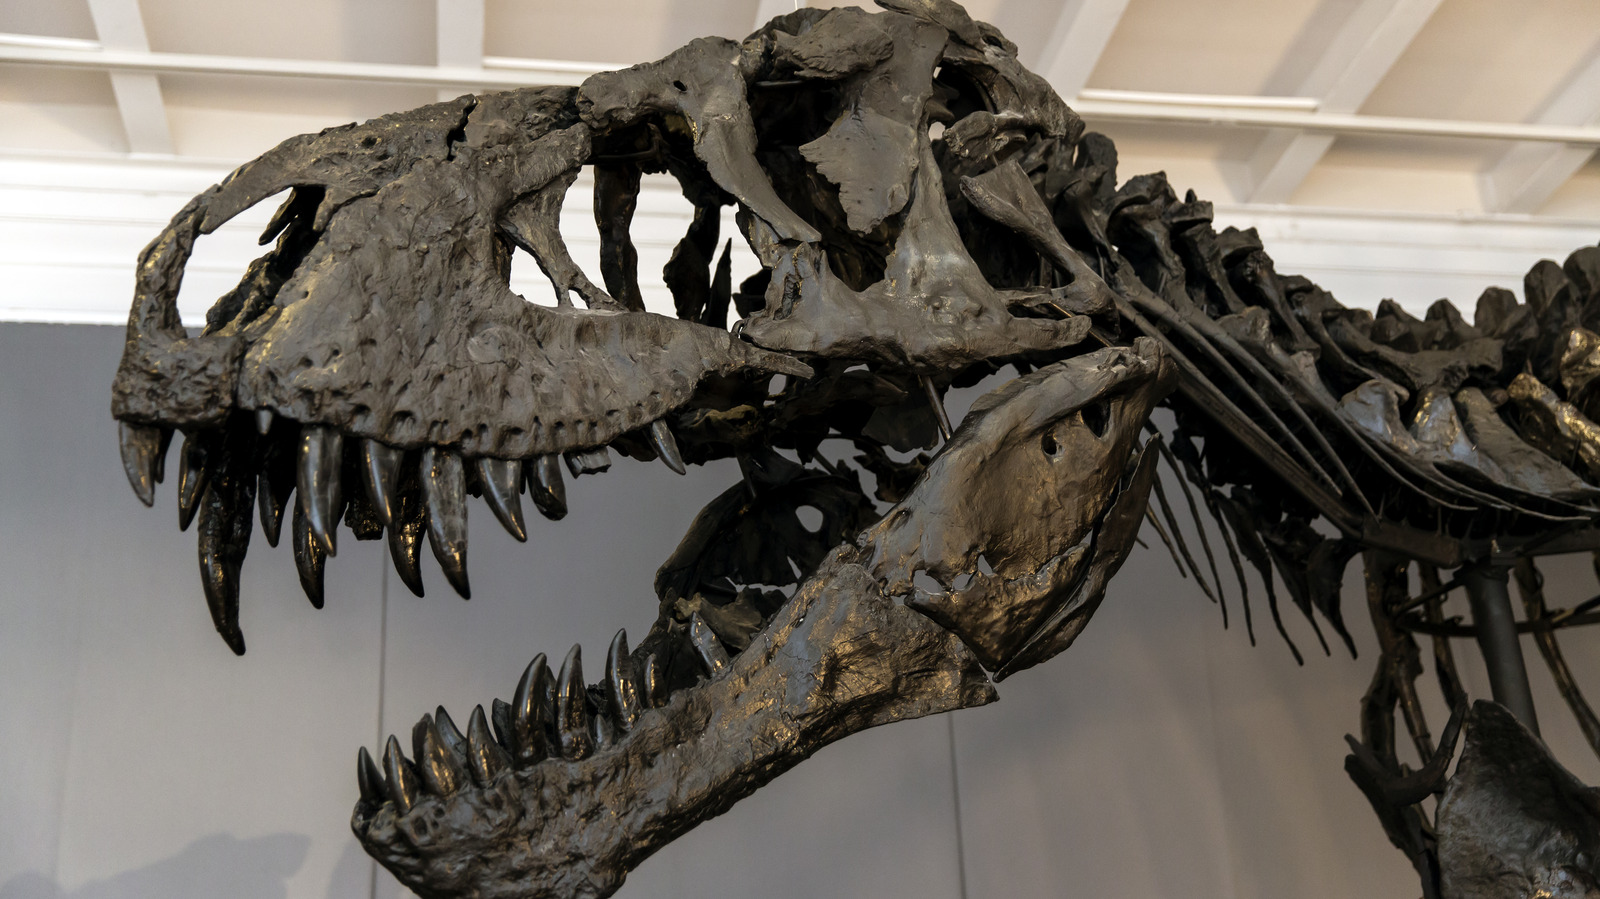 T. Rex Wasn't All Brawn. It Had a Brain Comparable to a Primate